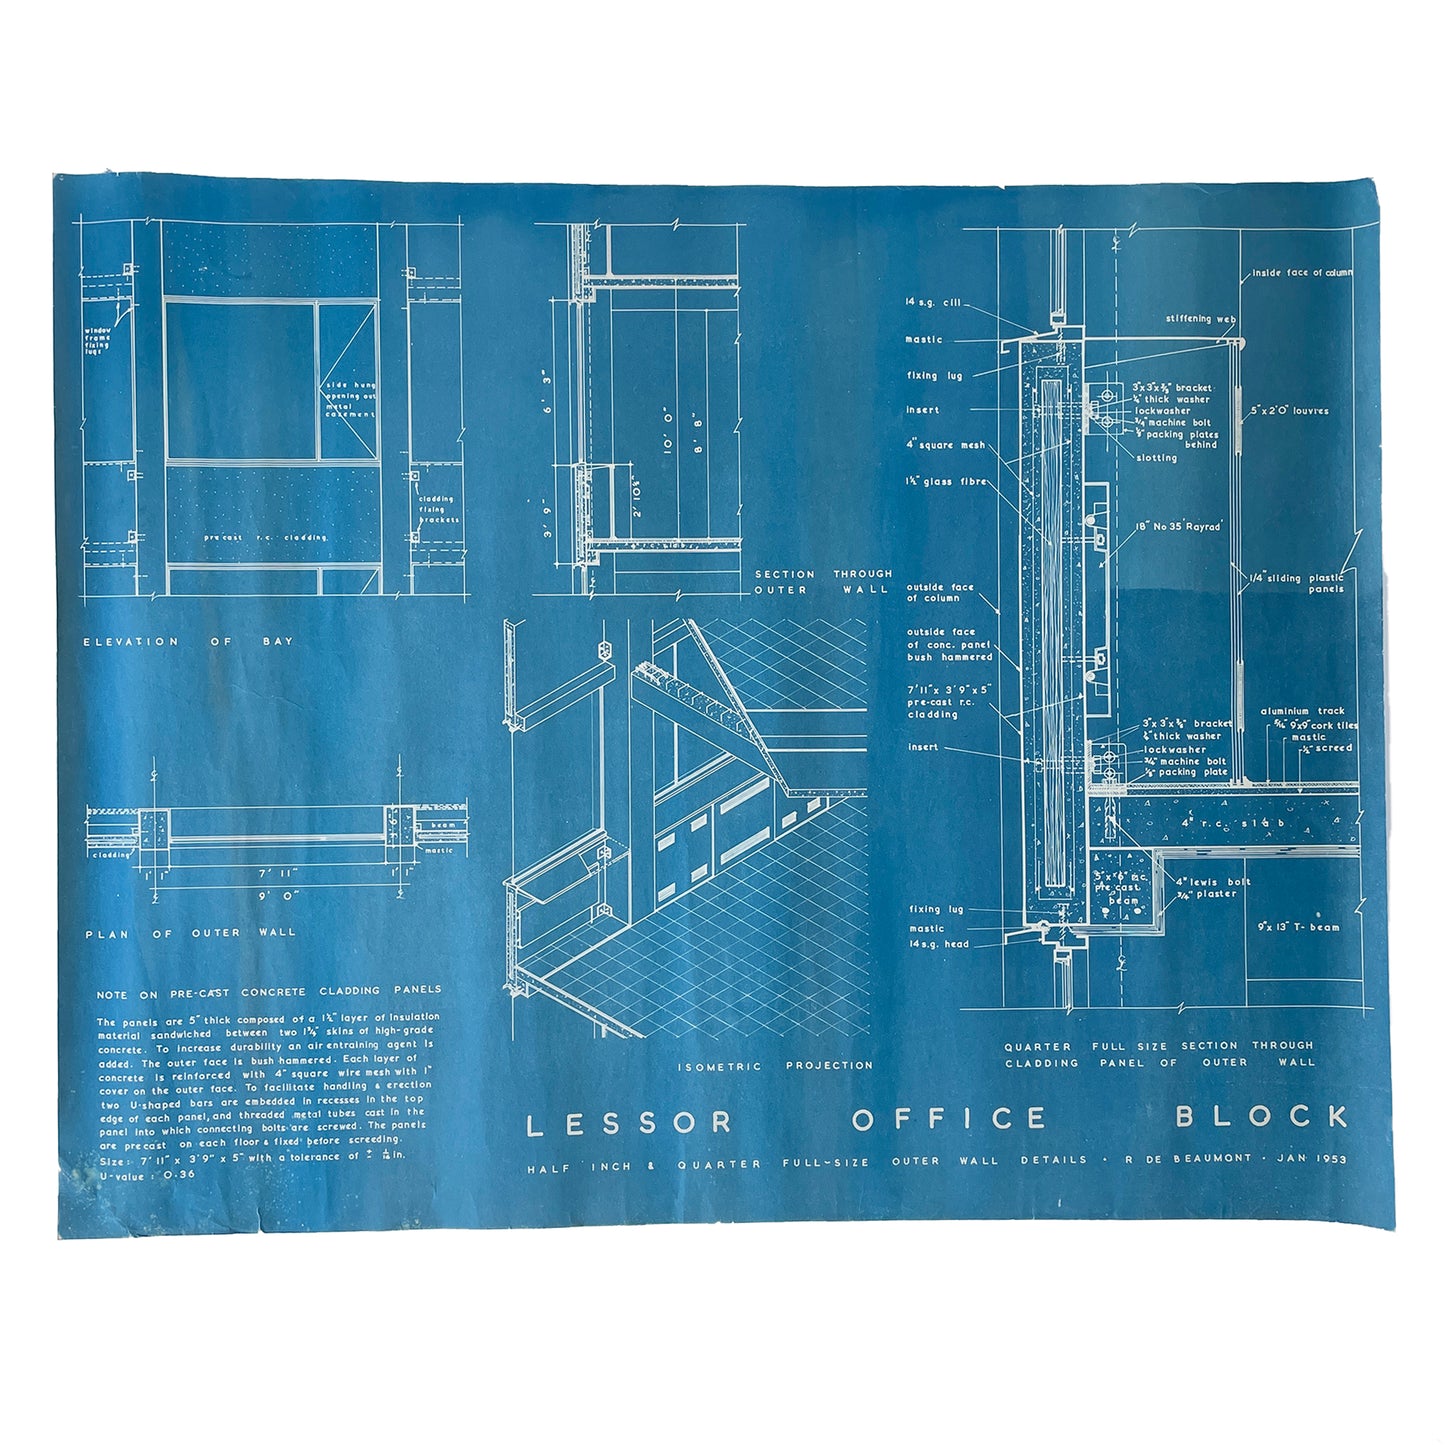 Set of 1952/53 Architectural Plans – Office Building